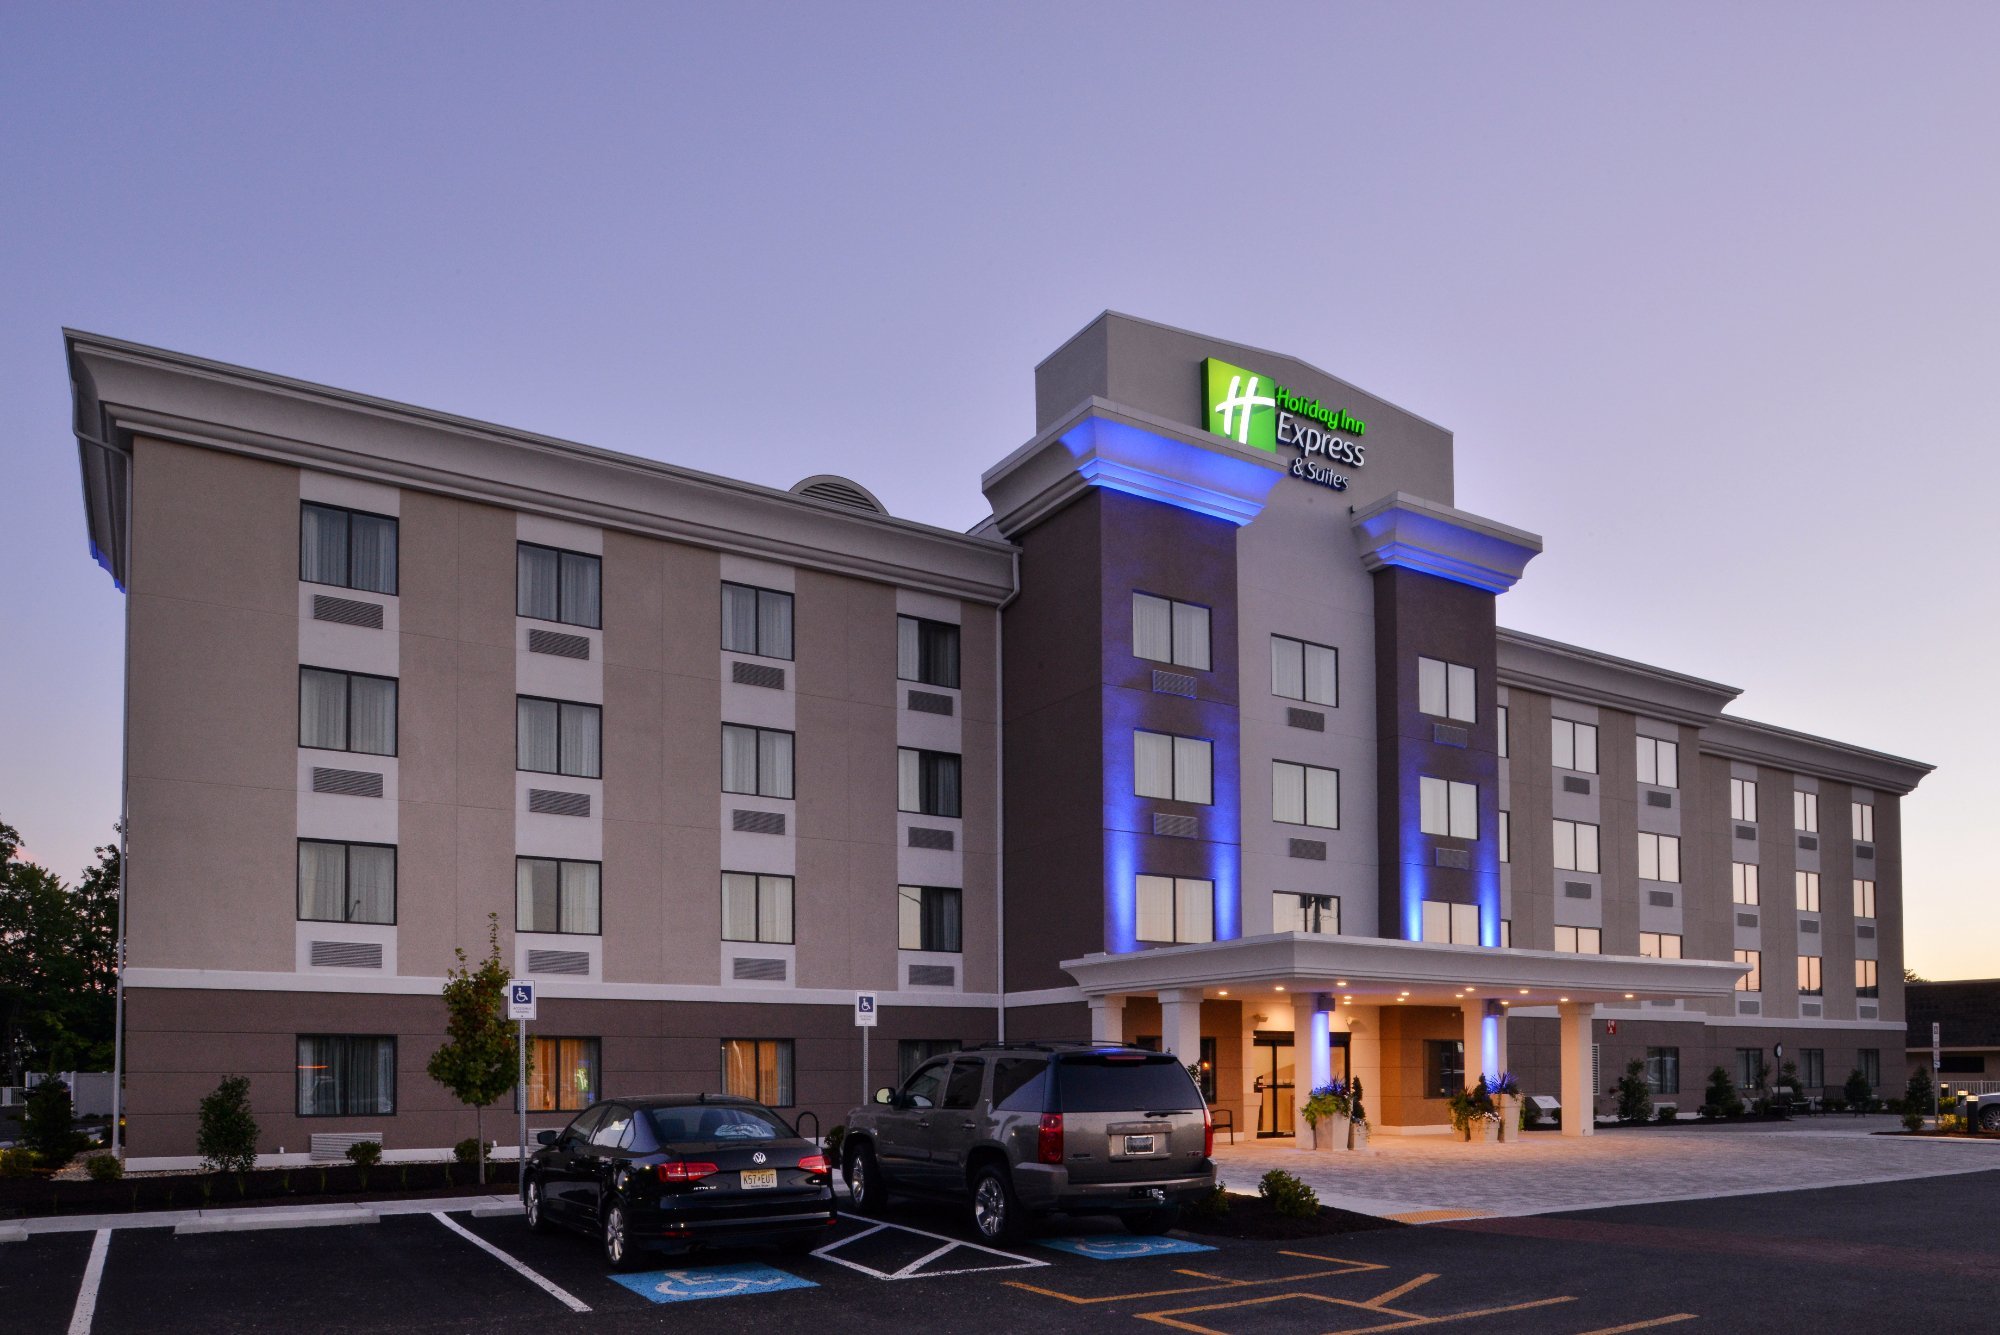 Photo of Holiday Inn Express & Suites West Ocean City, Ocean City, MD